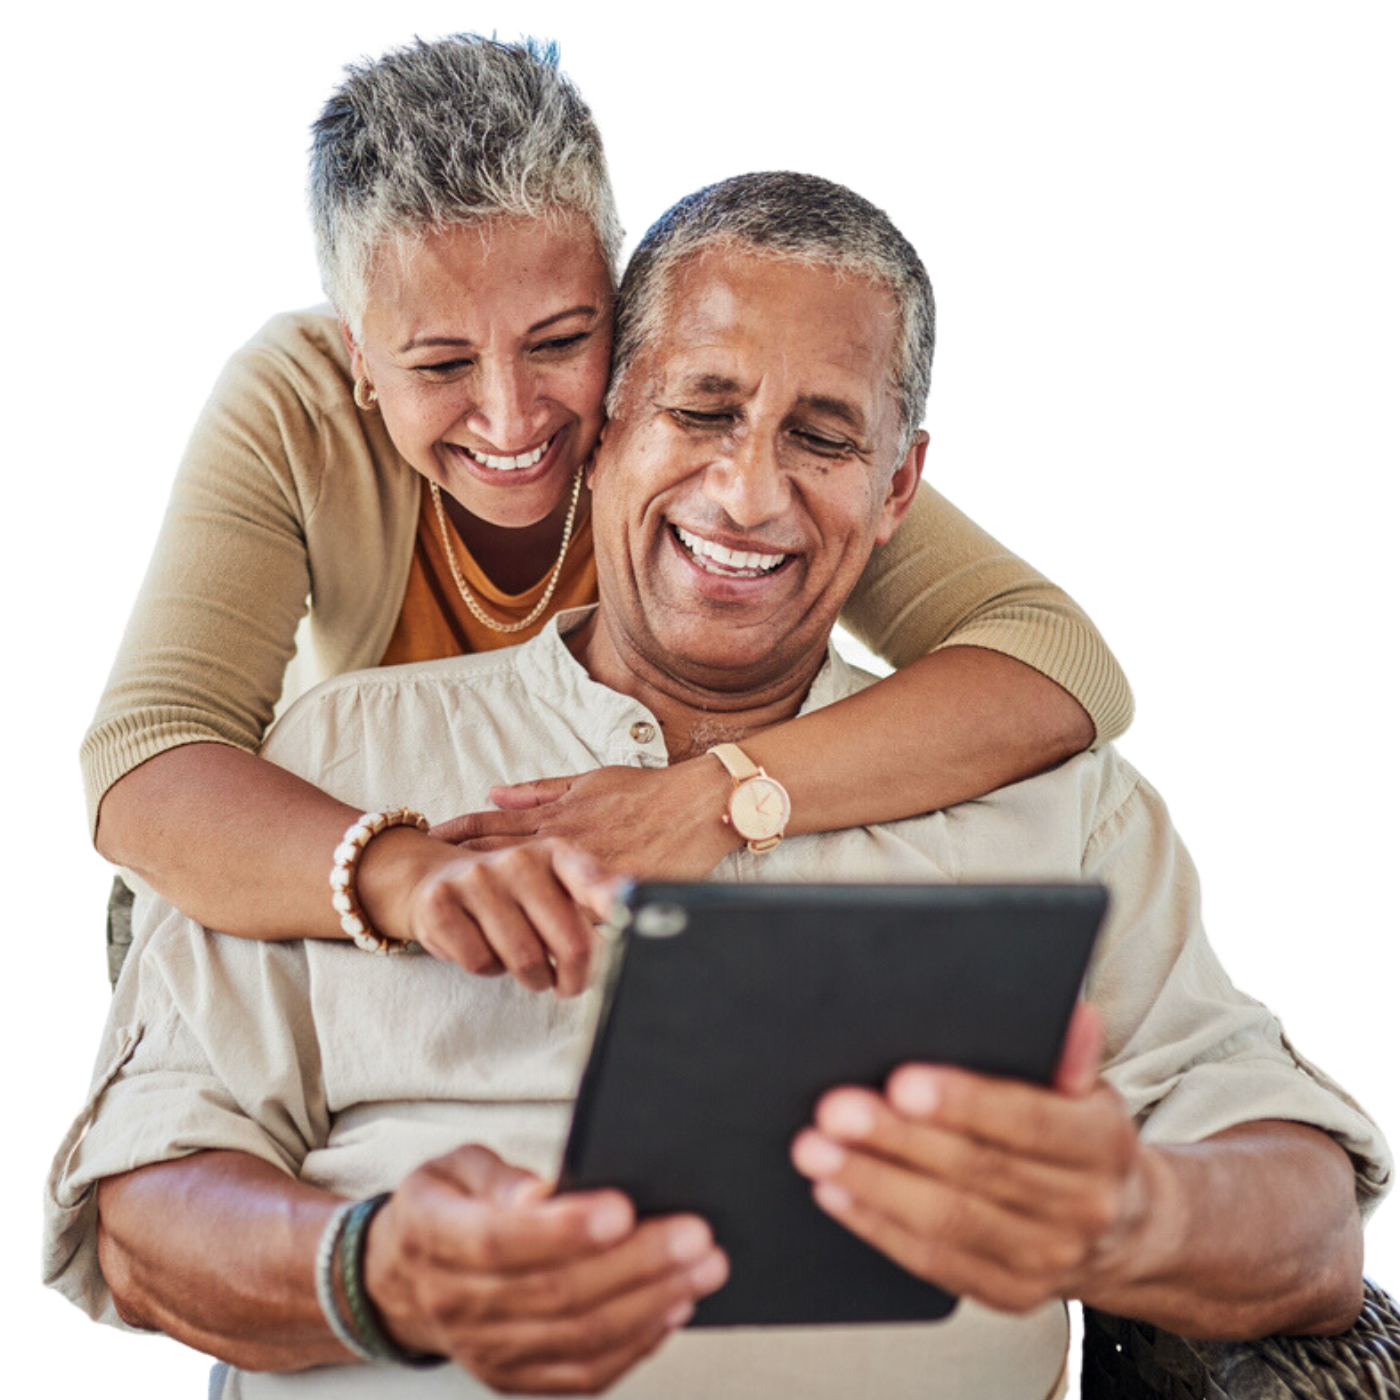 Older couple looking at tablet together, smiling